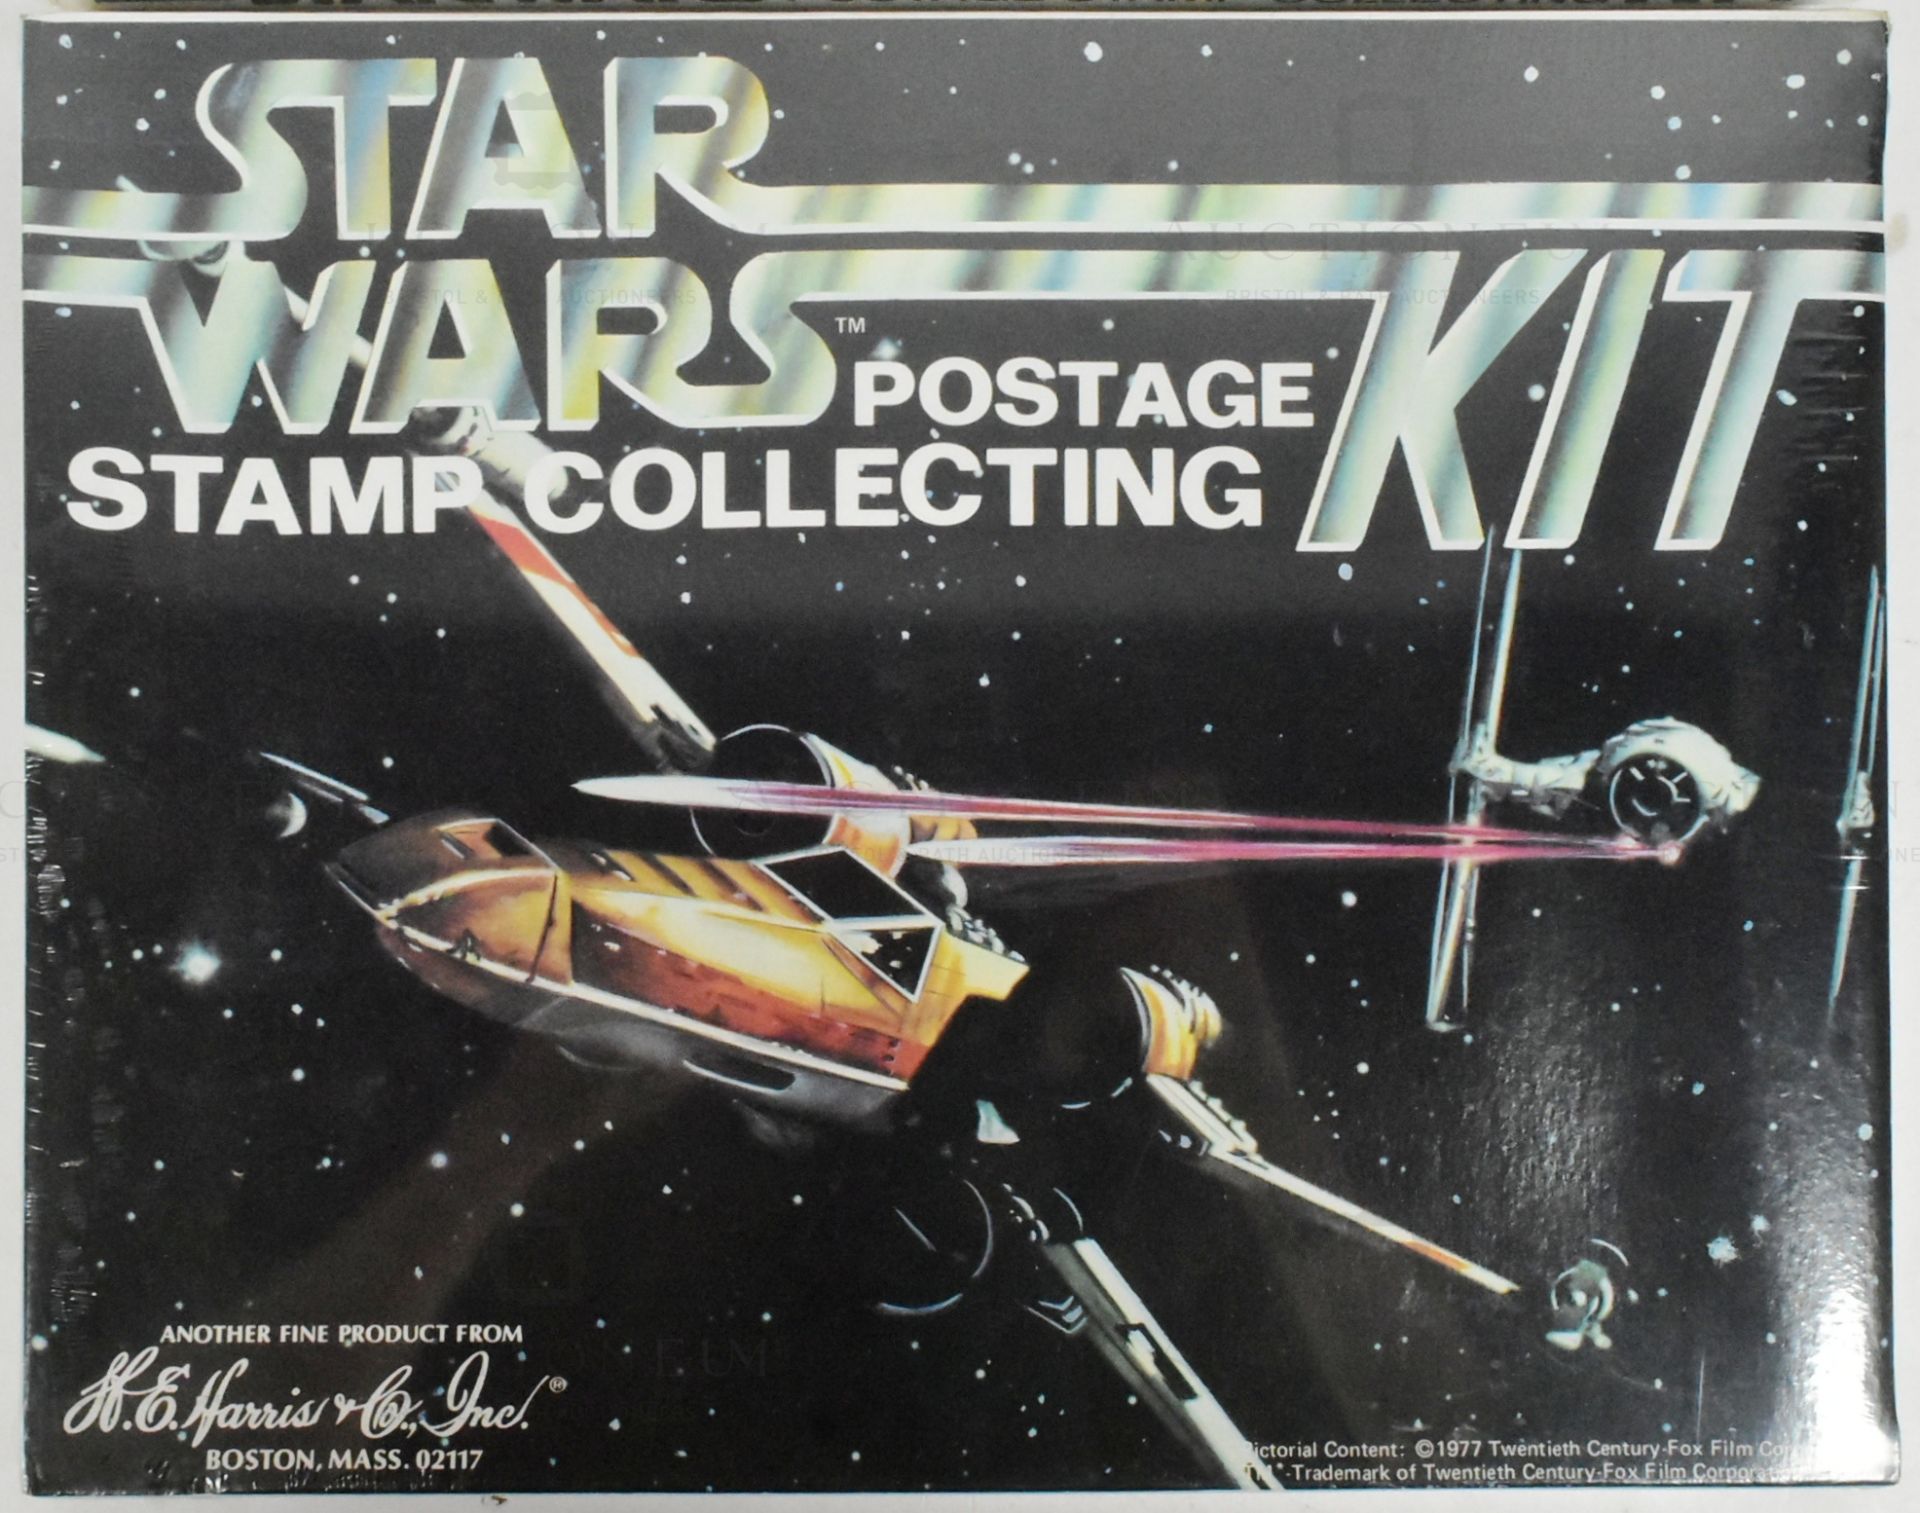 STAR WARS - HE HARRIS & CO - STAMP COLLECTING KIT - FACTORY SEALED - Image 2 of 4